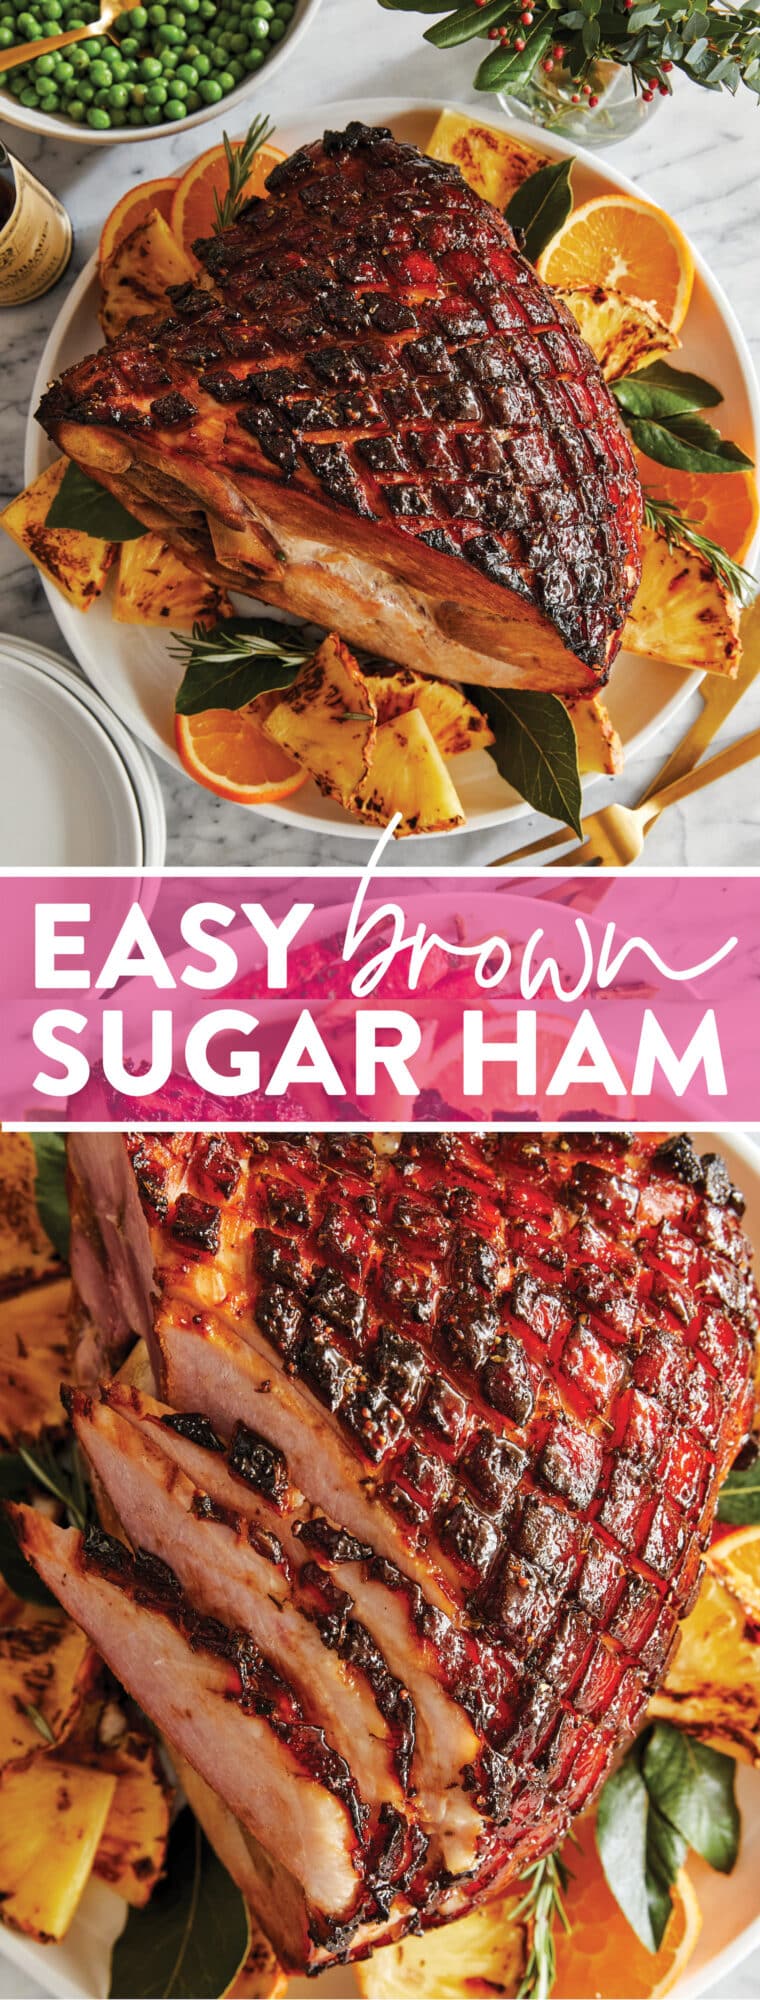 Easy Brown Sugar Ham - The most incredible brown sugar glaze there ever was. Perfectly sweet, tangy and savory! An absolute holiday classic.